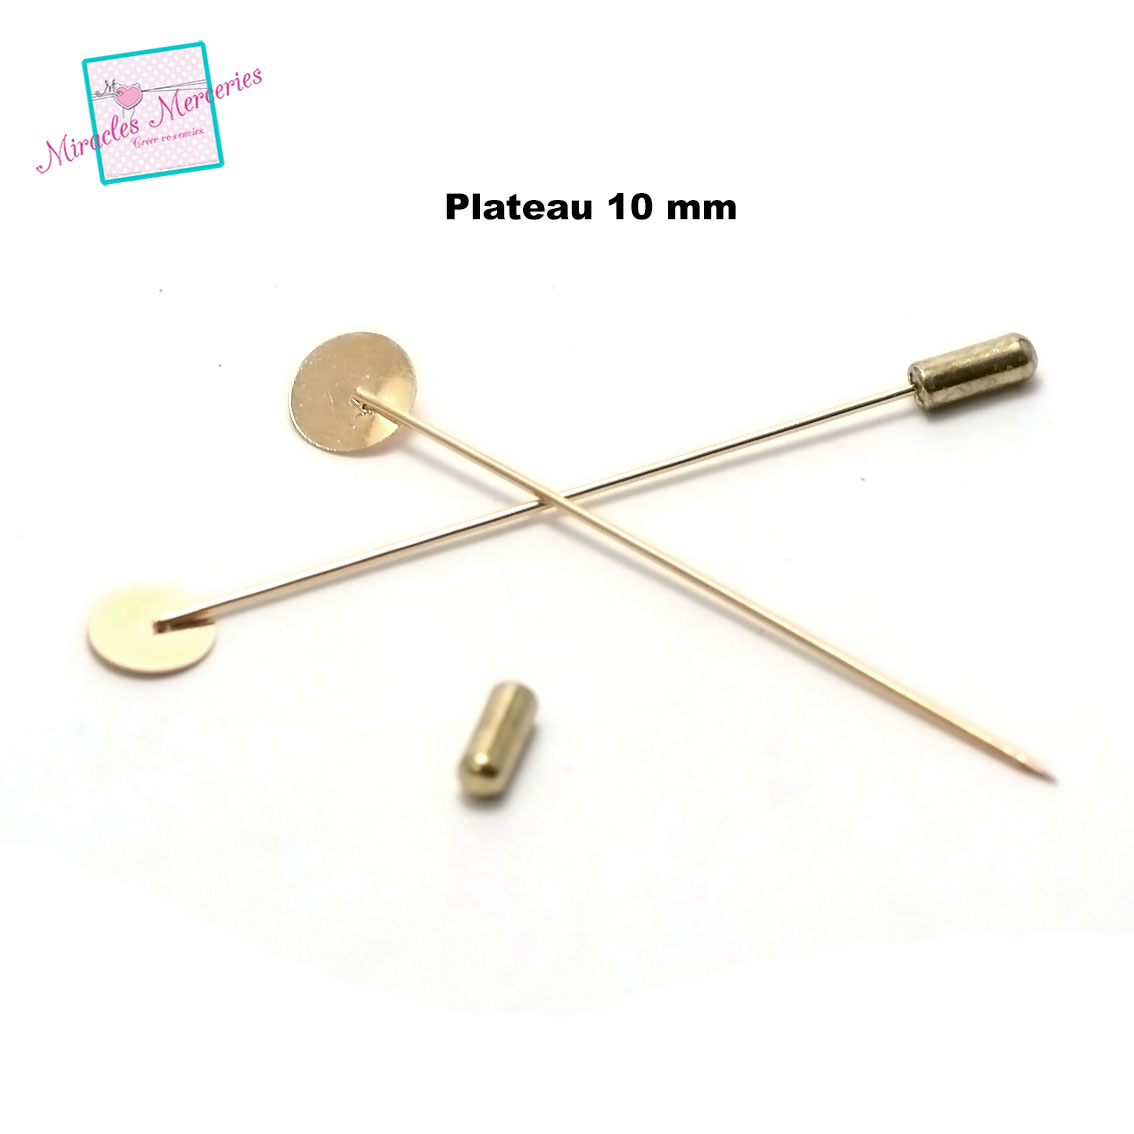 épingle support plateaux 10 mm doré